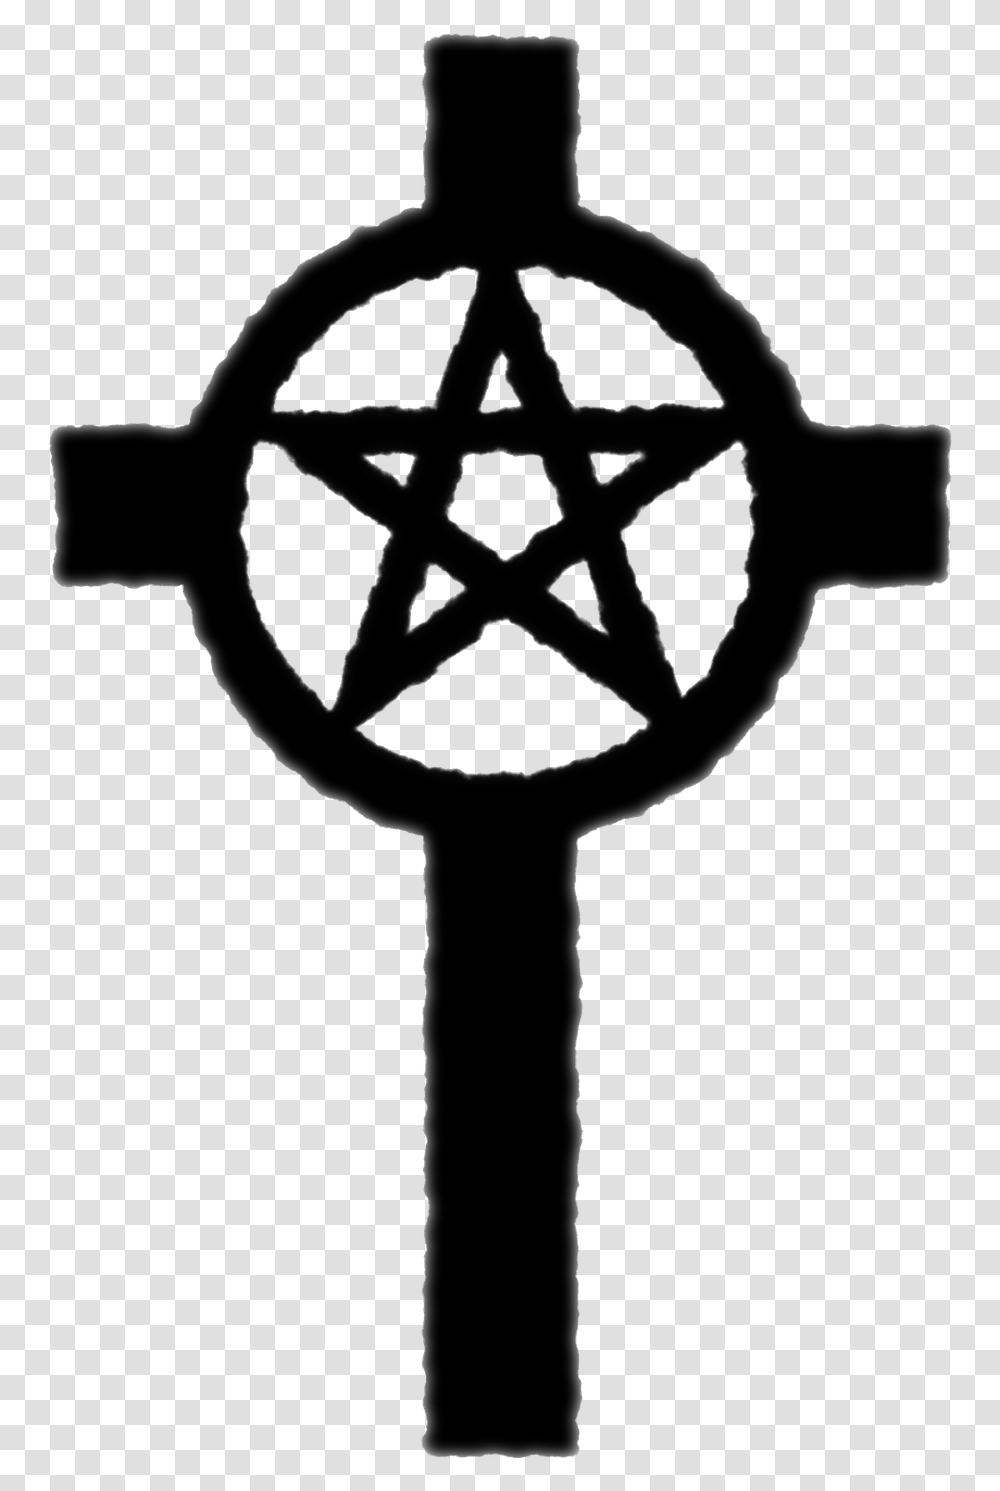 Wicca Pentacle Christianity And Neopaganism Christian Cross Symbols Of Protection, Star Symbol Transparent Png